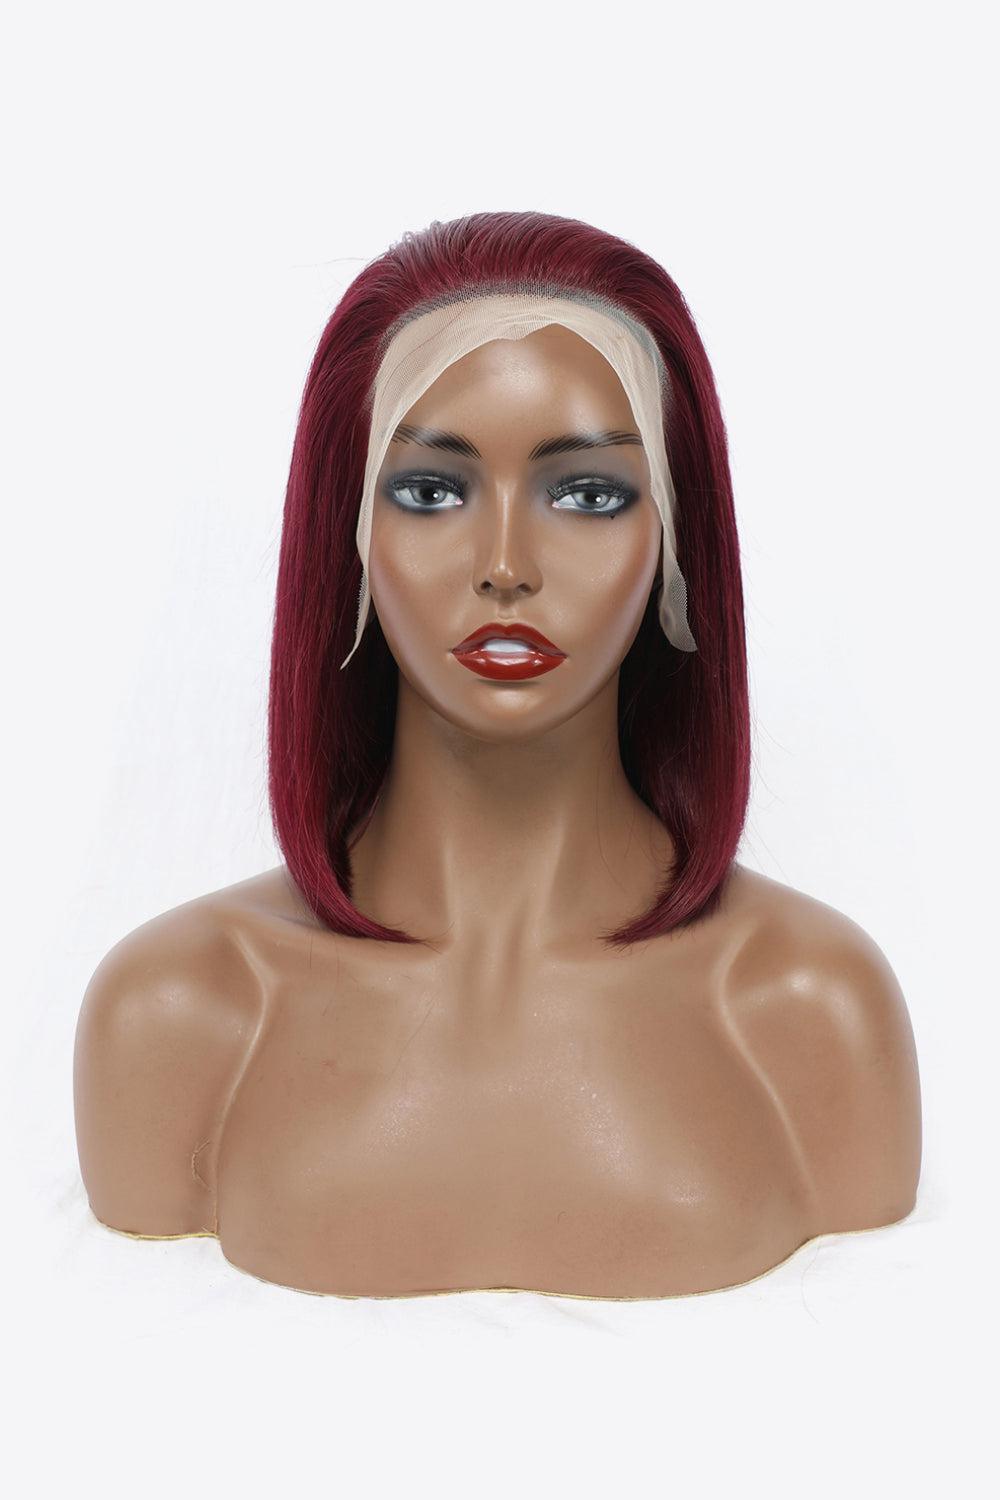 a mannequin head with a red and white wig